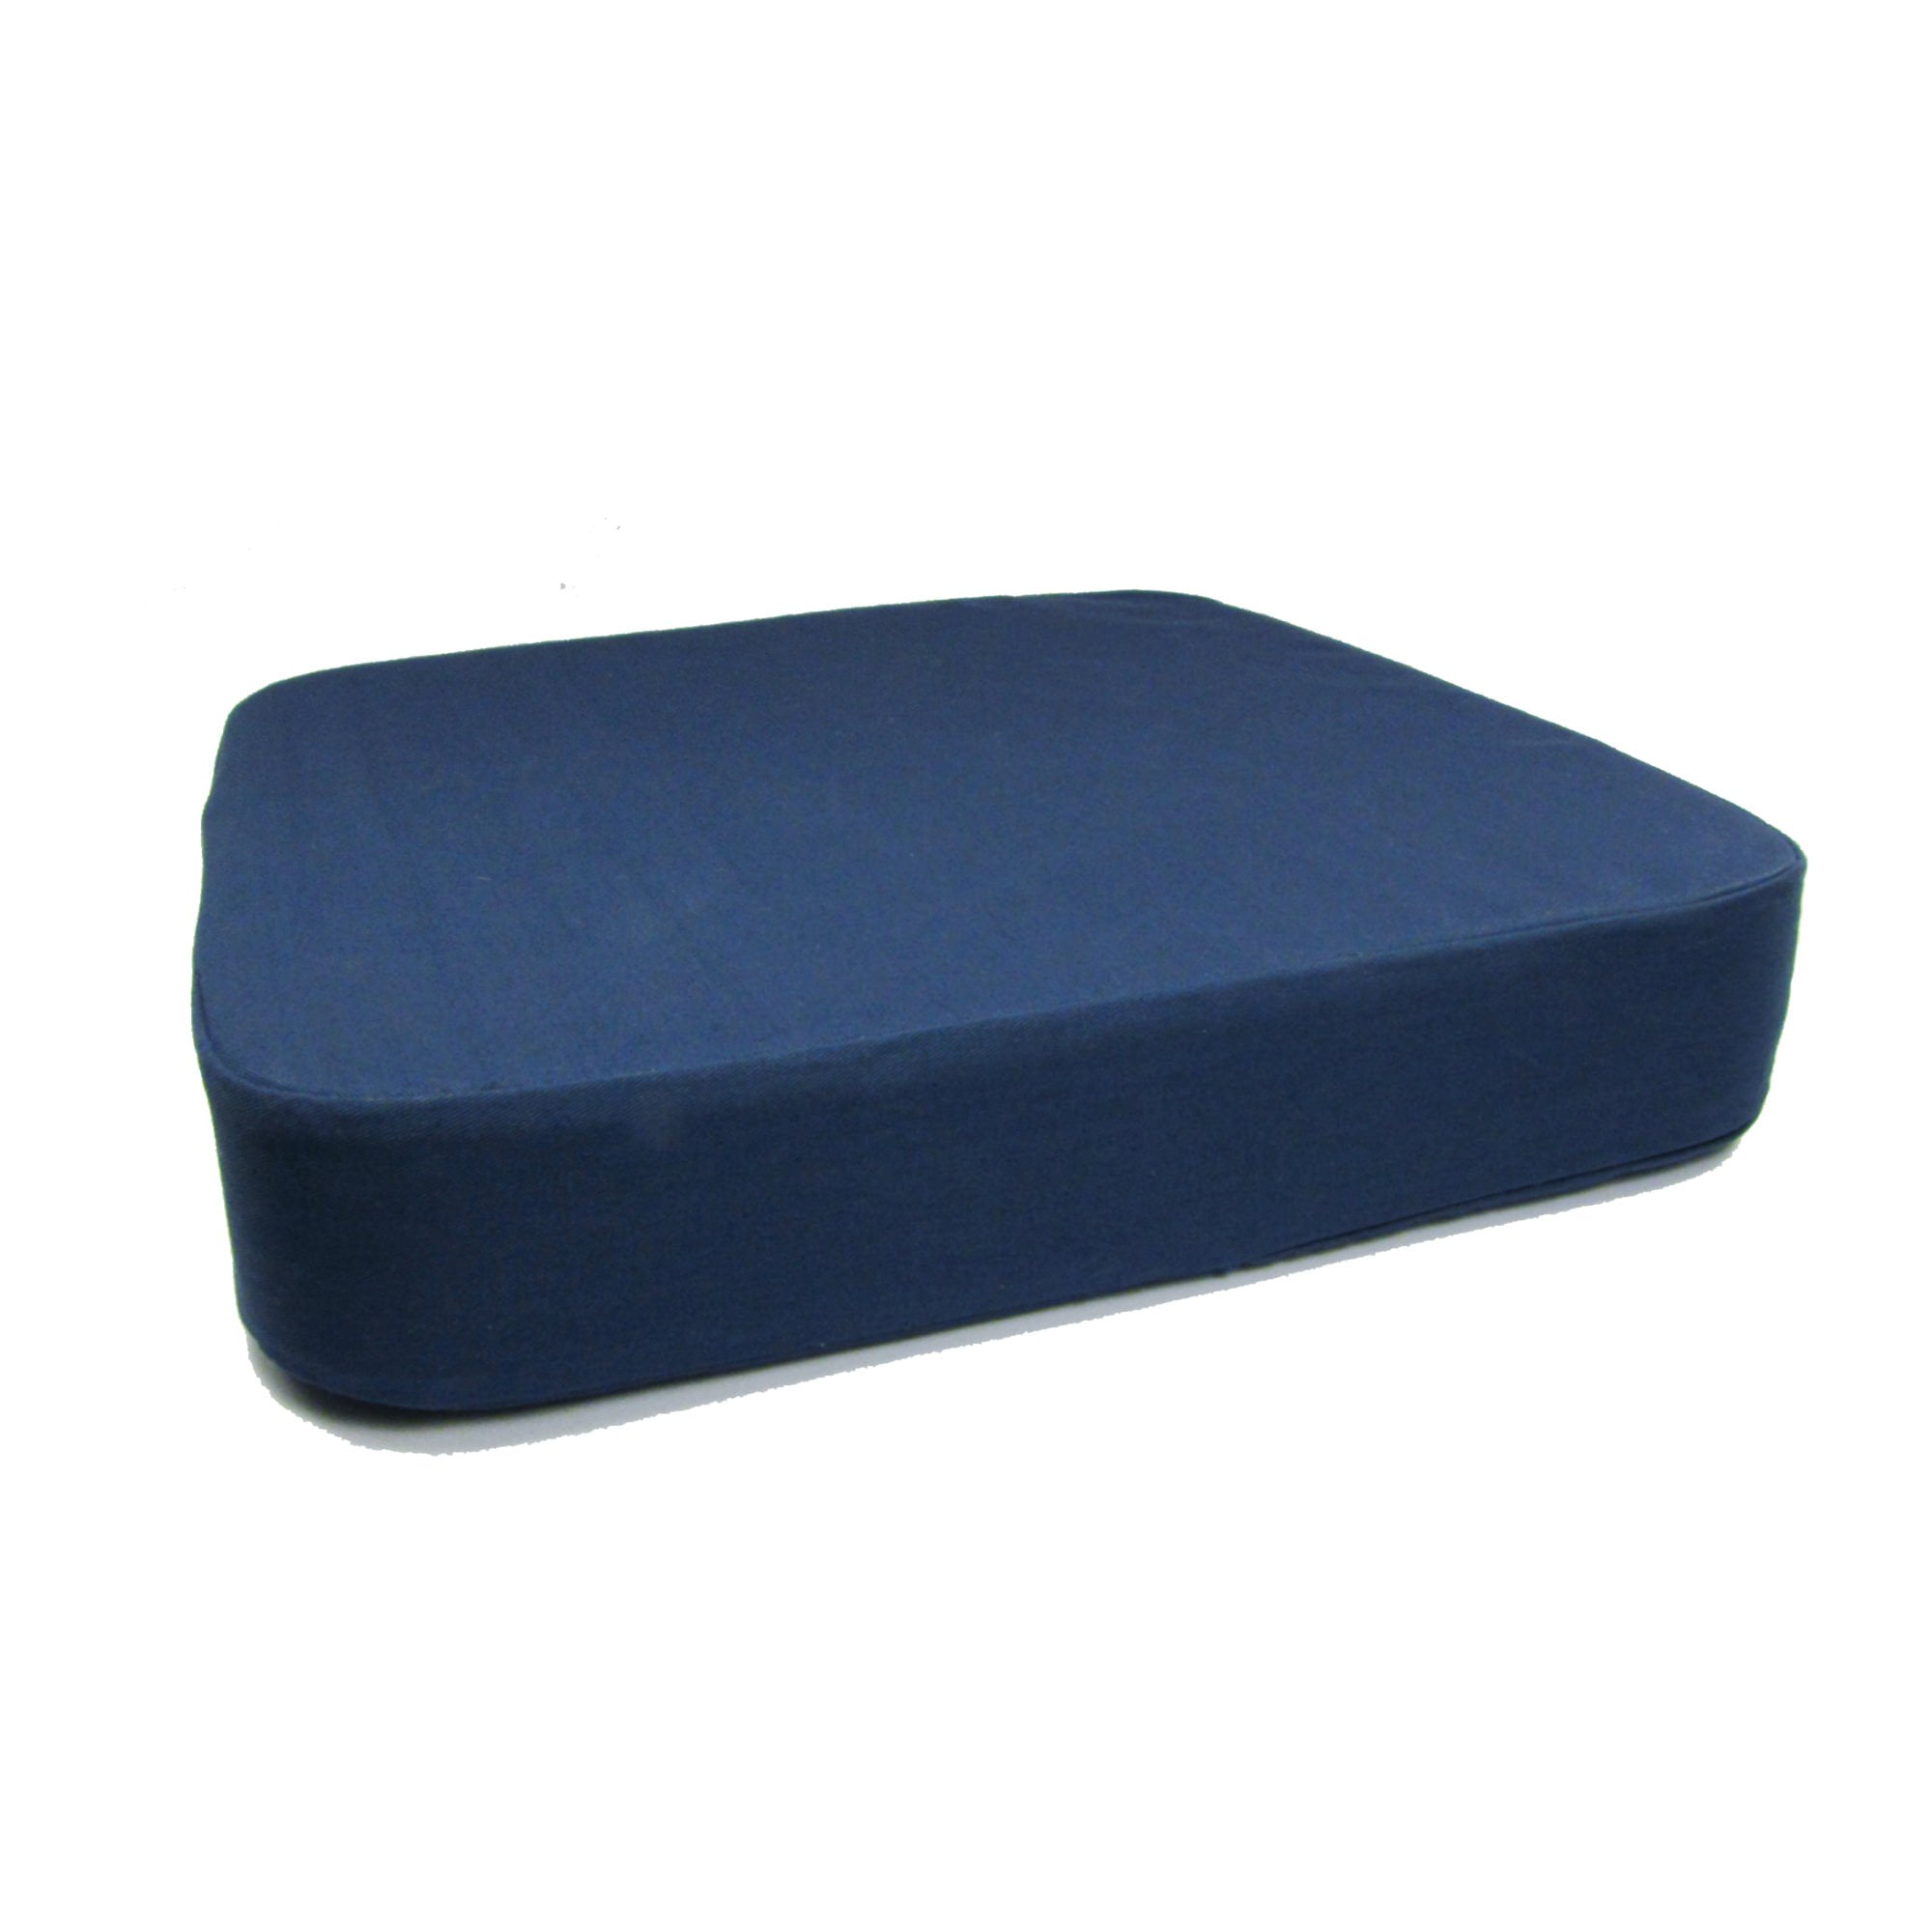 4 Inch Extra Thick Seat Cushion, Dual Layer Memory Foam Chair